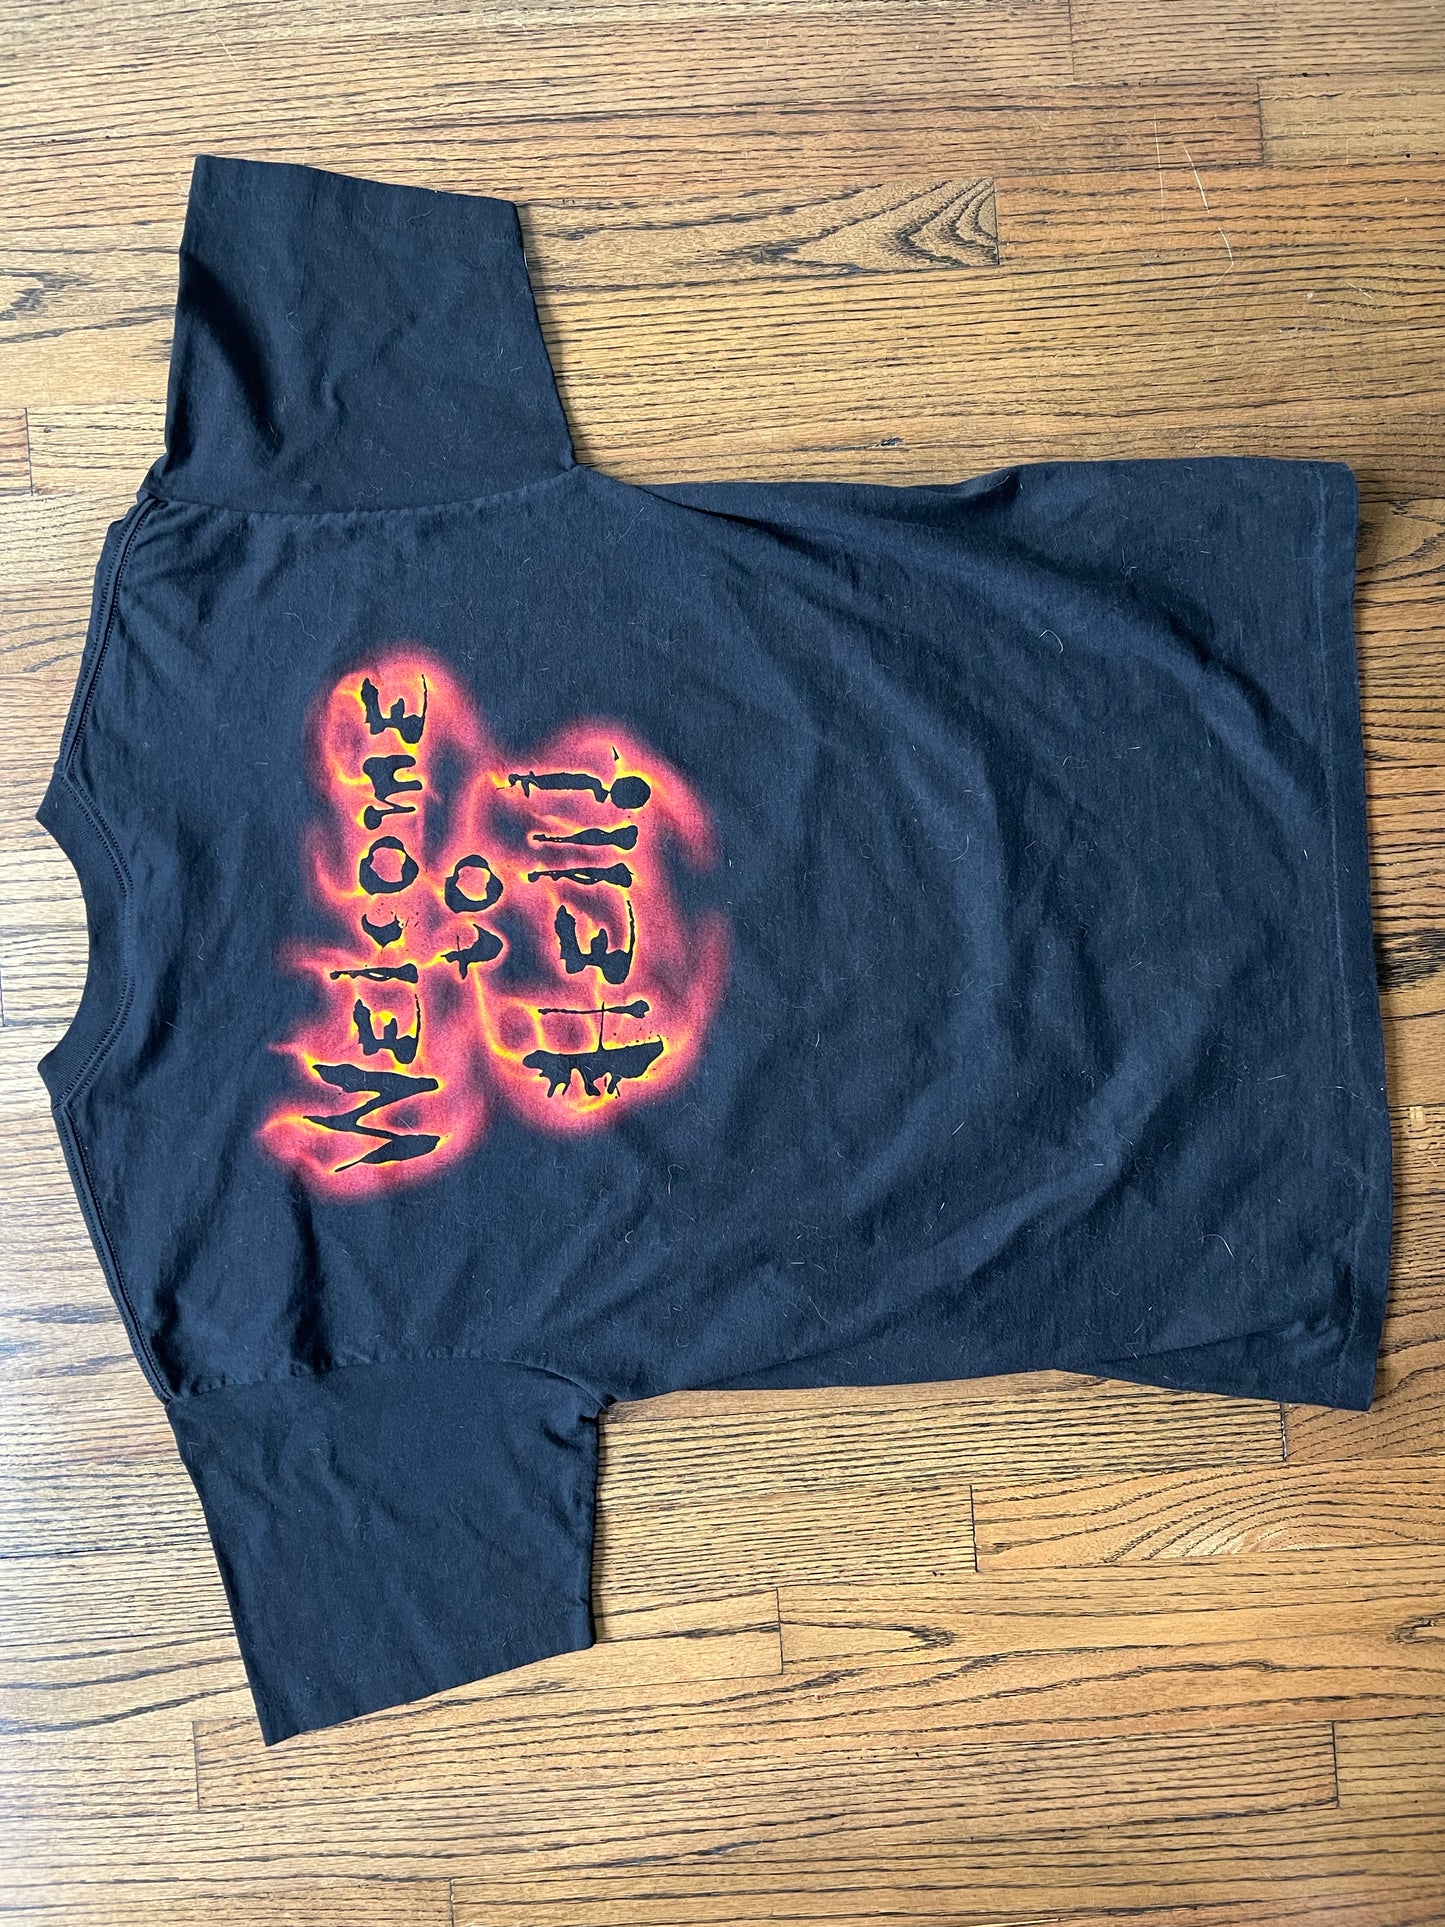 1998 WWF Kane “Welcome to Hell” shirt